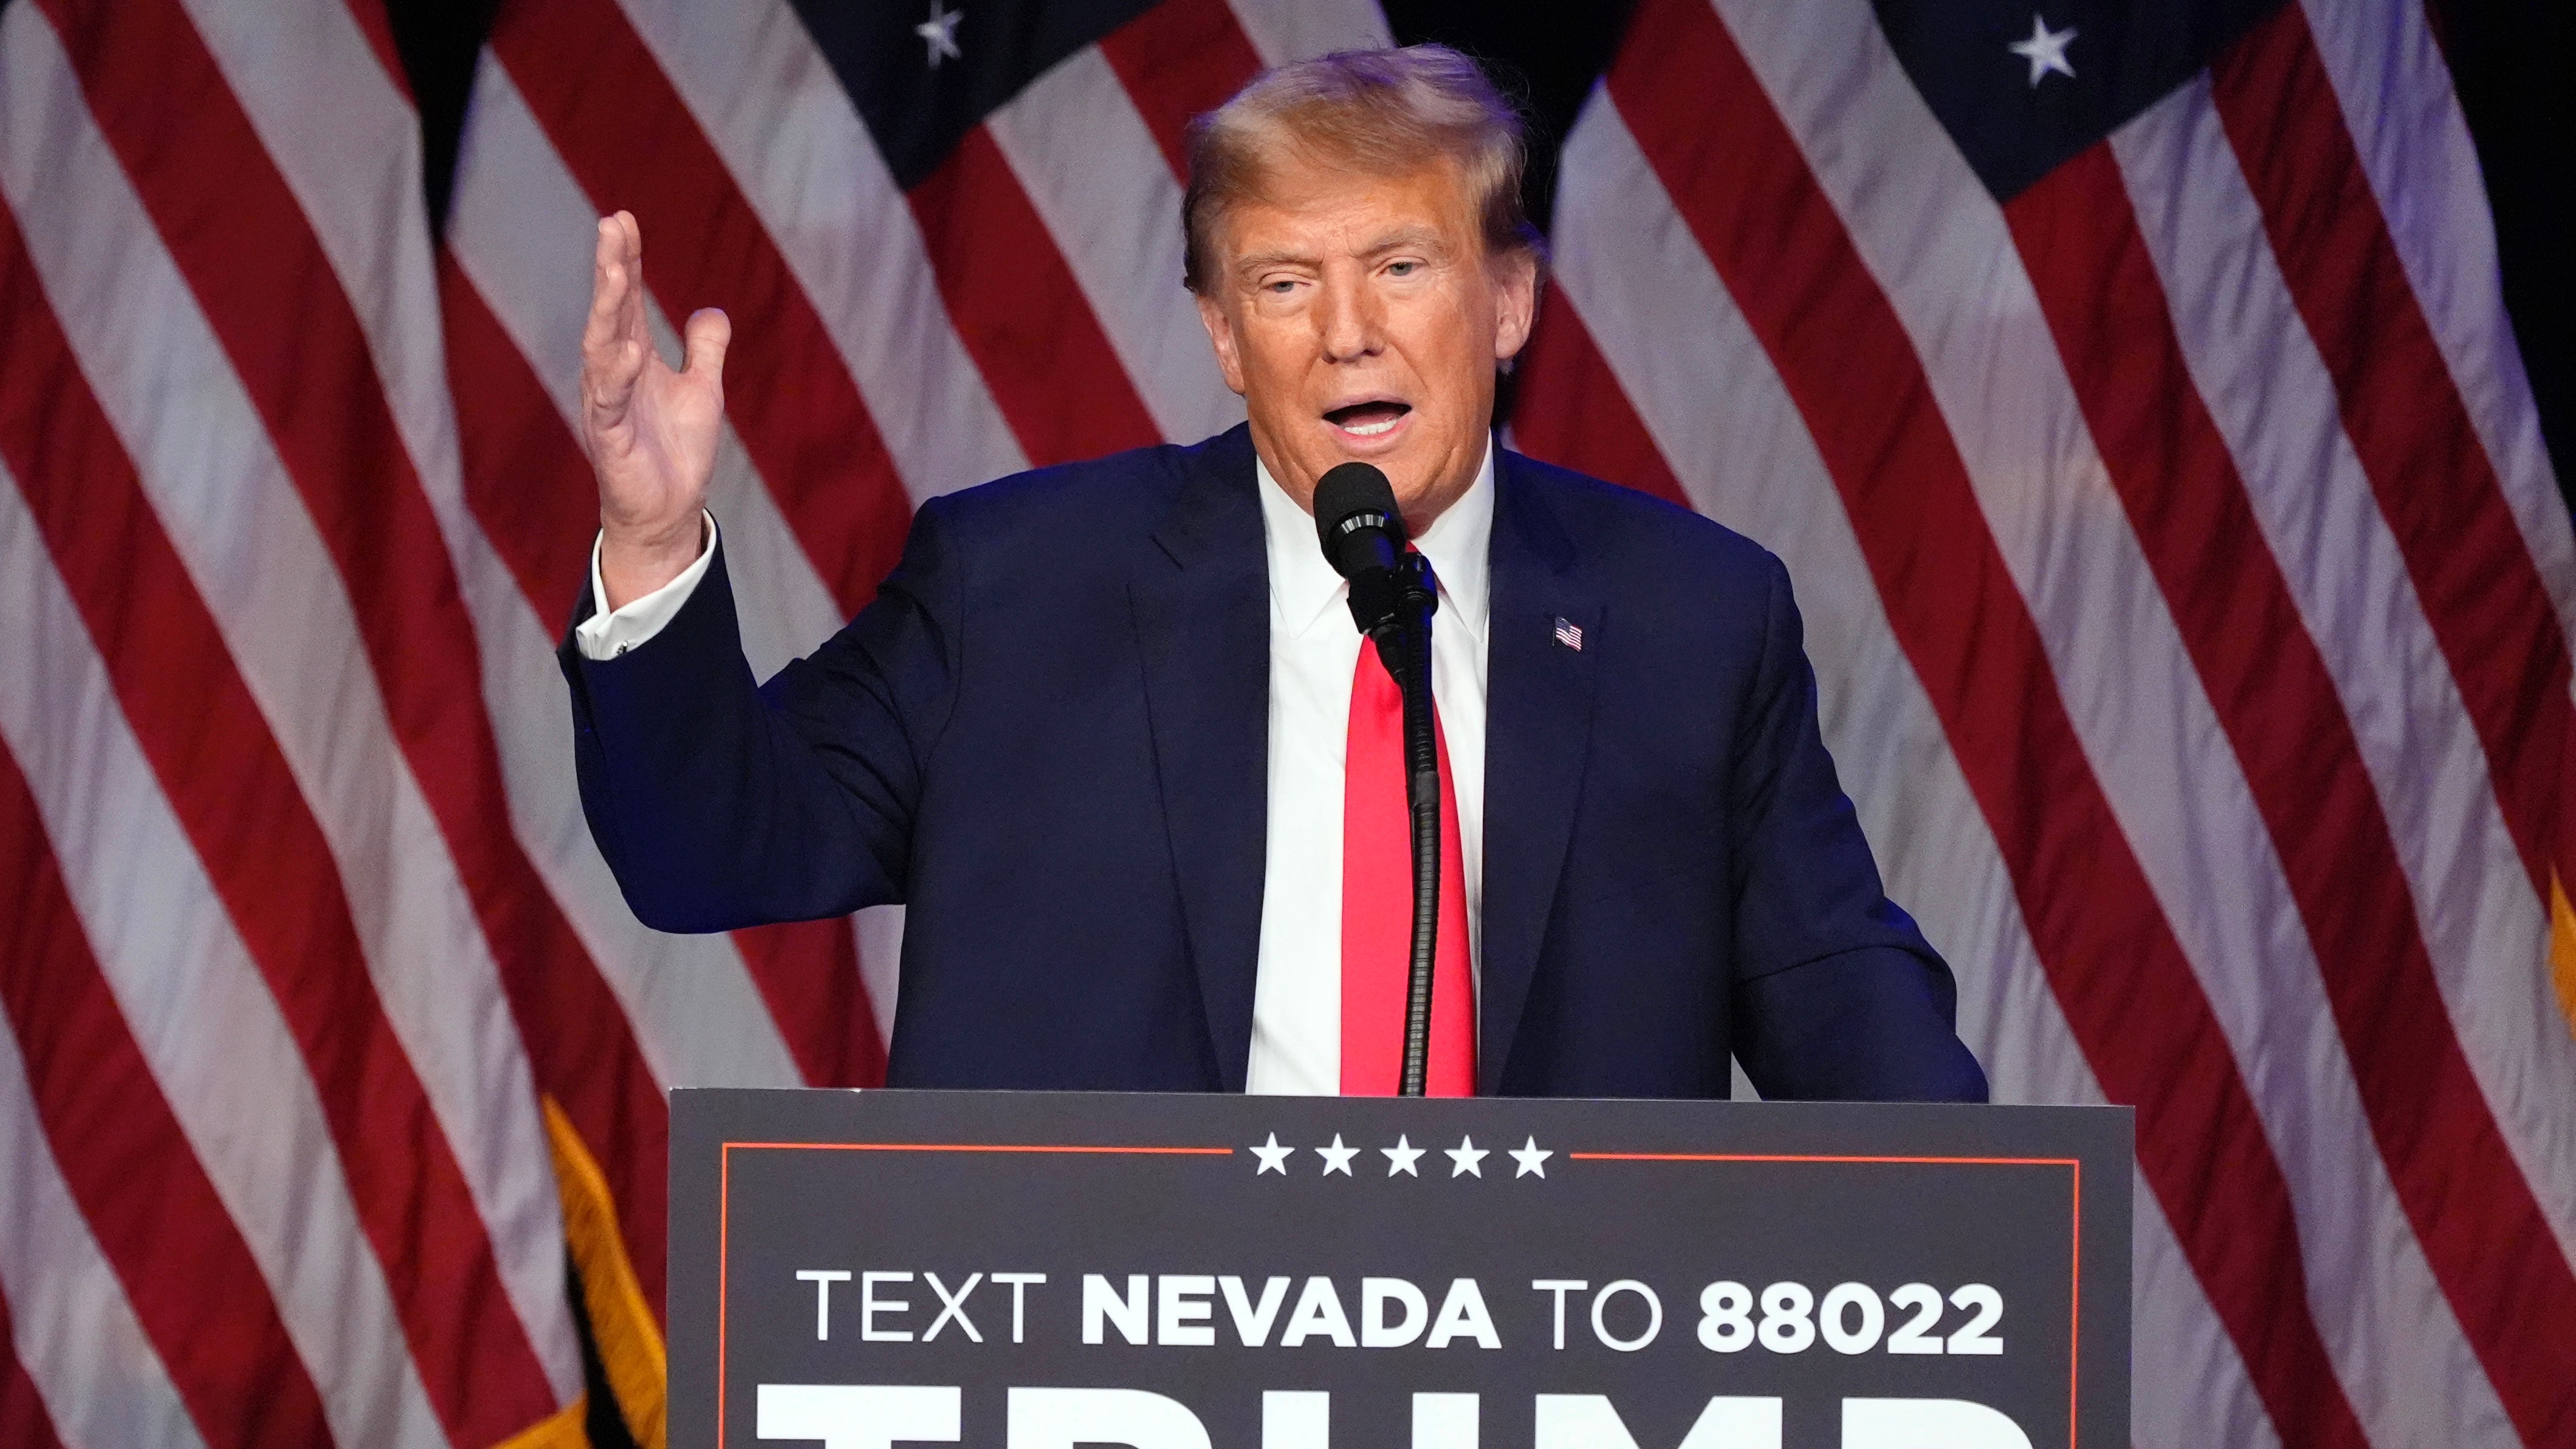 Donald Trump Wins Nevada Republican Caucus for Third Straight State Victory; Nikki Haley Finishes Behind 'None of These Candidates' Option in Primary Election